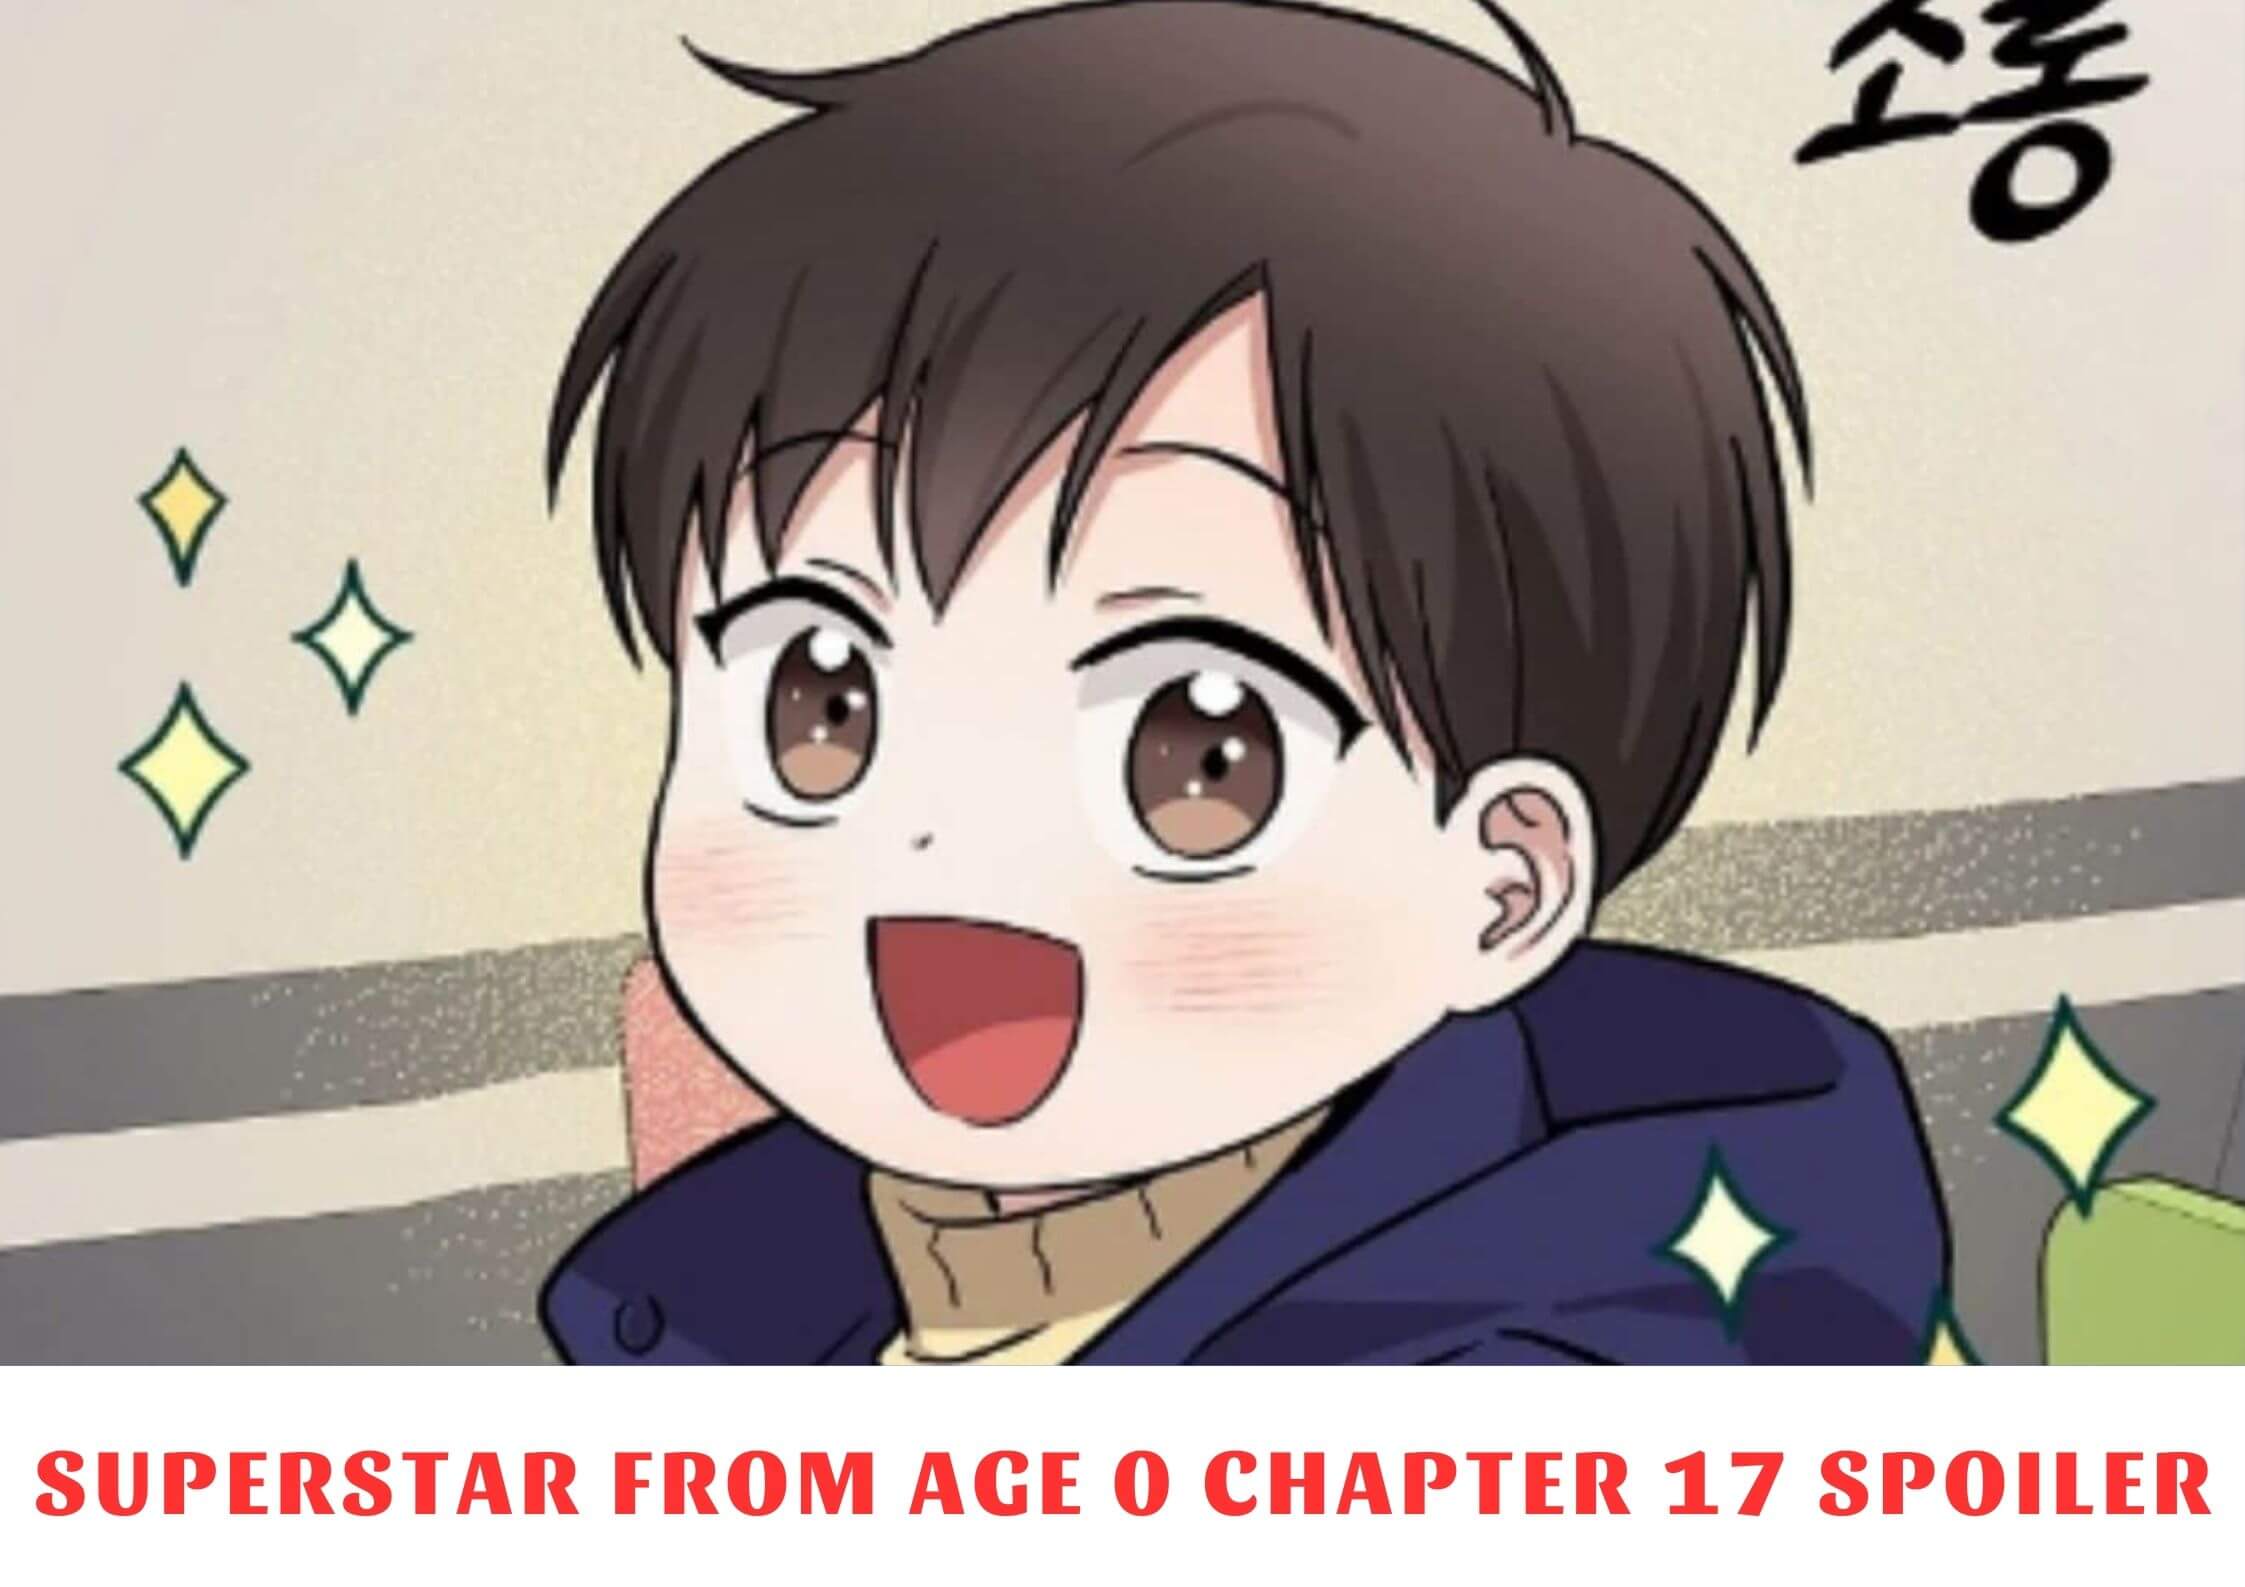 Superstar From Age 0 17 Superstar From Age 0 Chapter 17 Spoiler, Release Date, Recap, Raw Scans